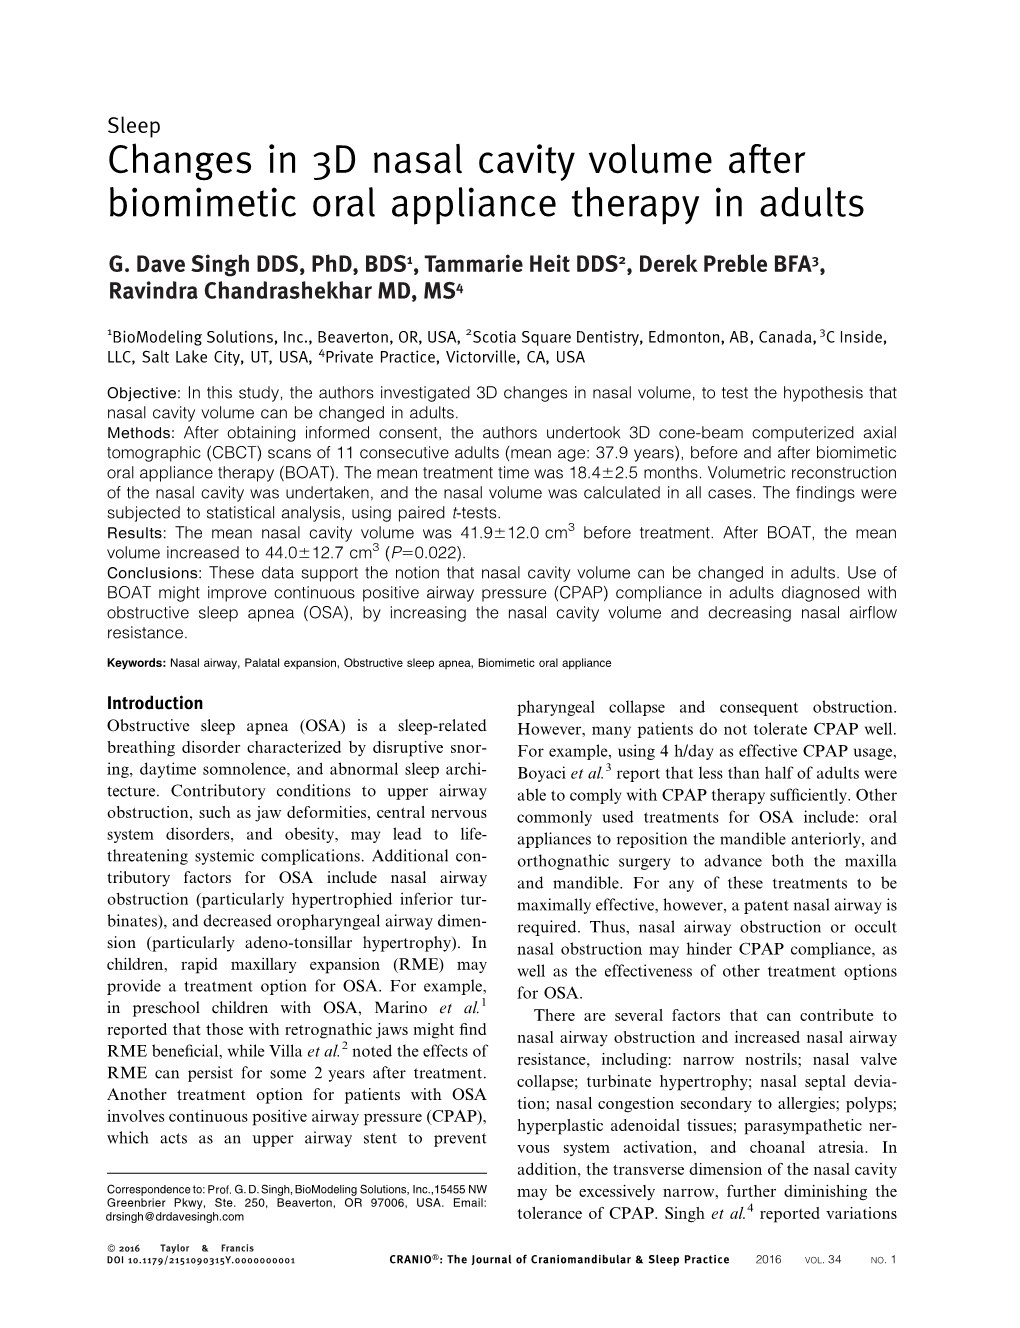 Changes in 3D Nasal Cavity Volume After Biomimetic Oral Appliance Therapy in Adults